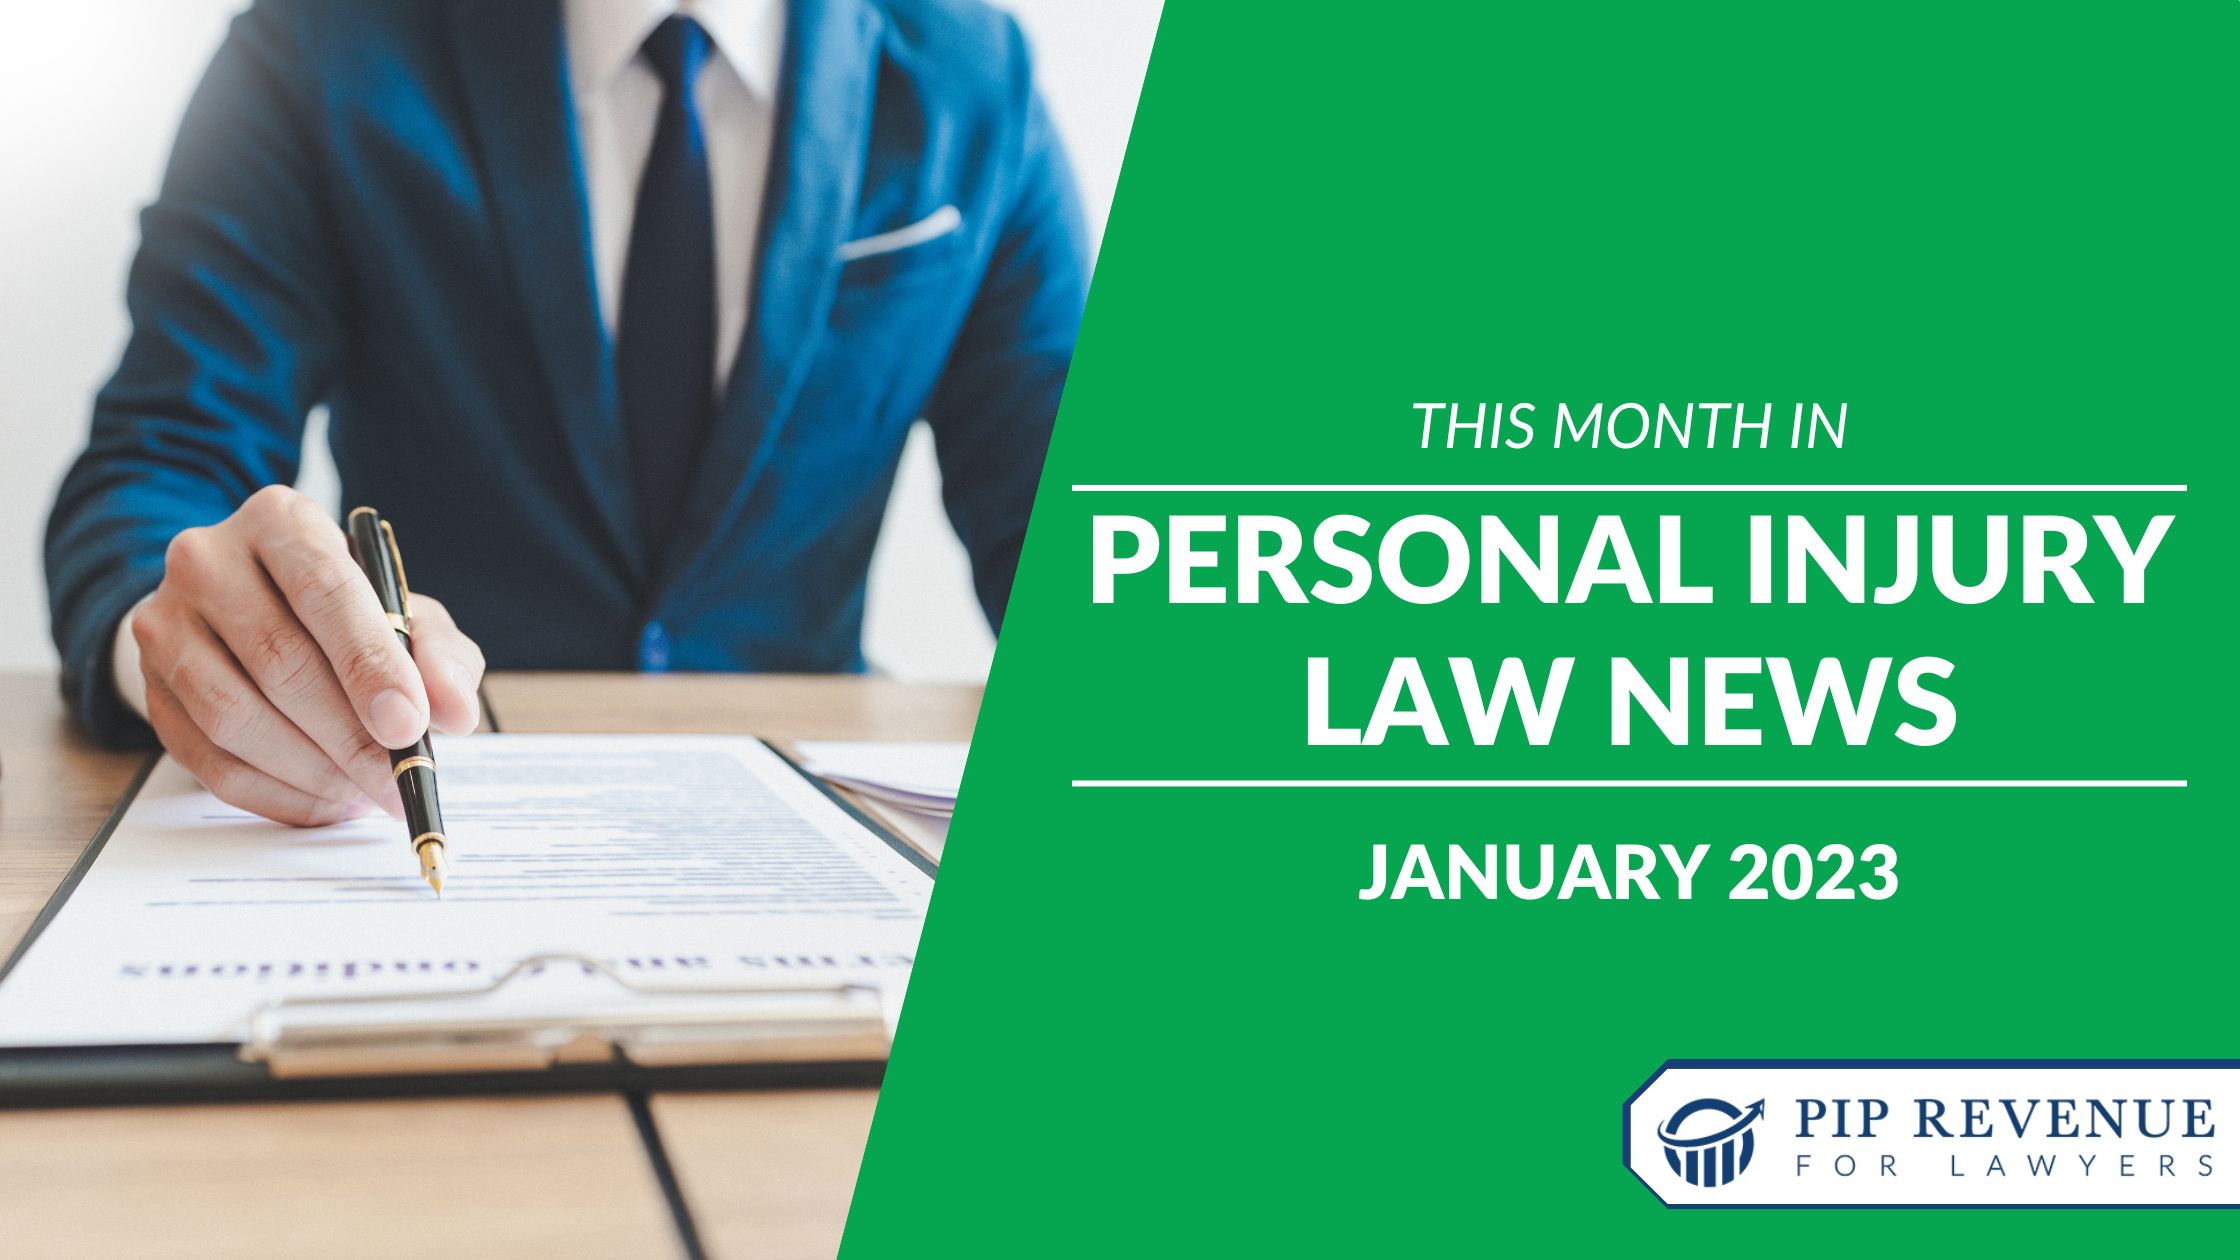 This Month in Personal Injury Law News - January 2023